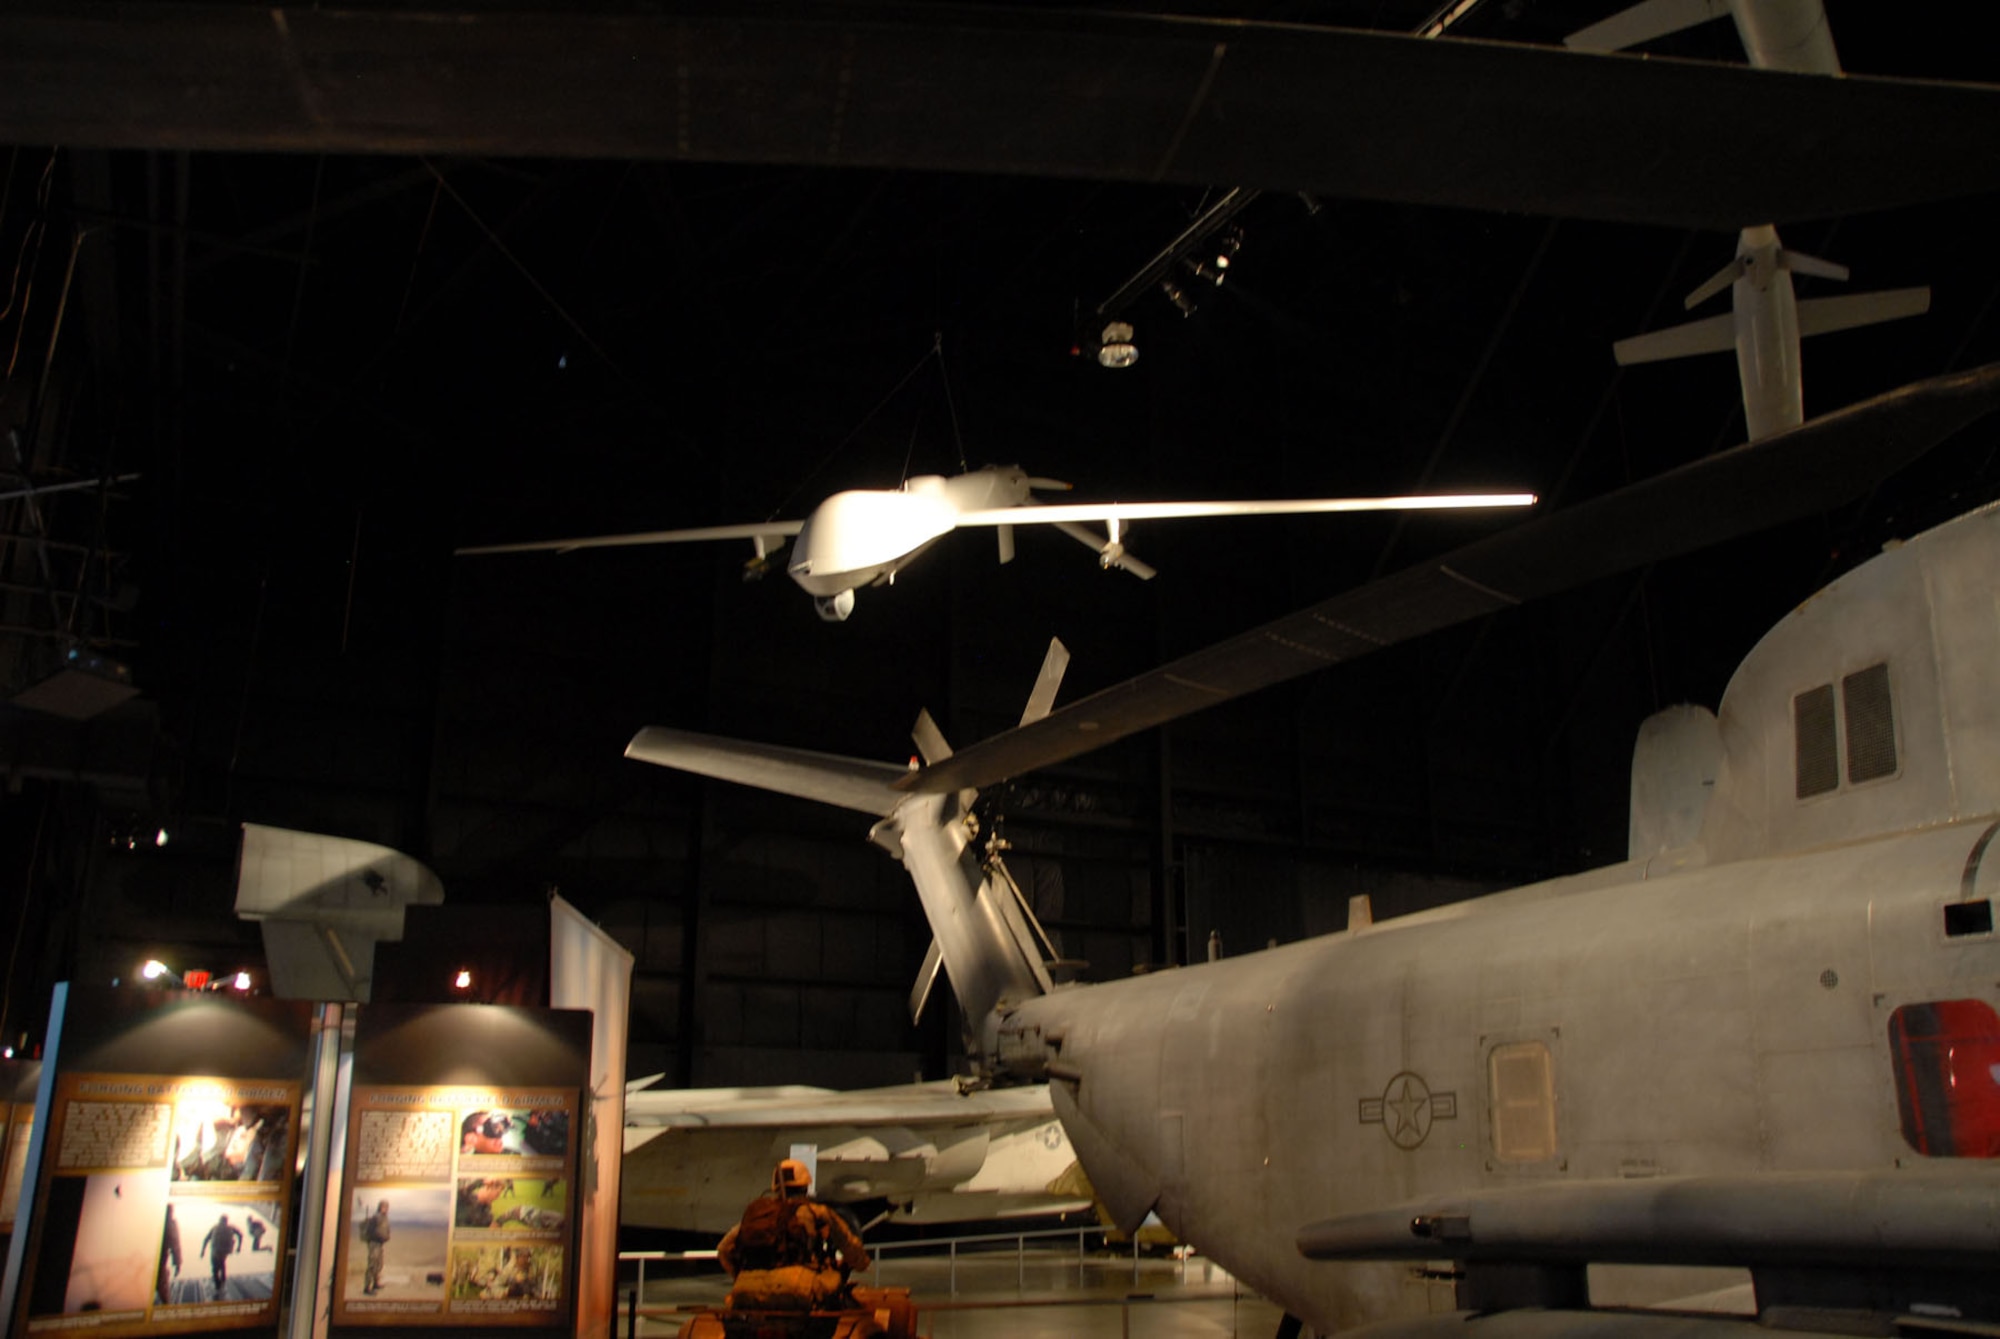 DAYTON, Ohio - General Atomics RQ-1 Predator in the Cold War Gallery at the National Museum of the U.S. Air Force. (U.S. Air Force photo)